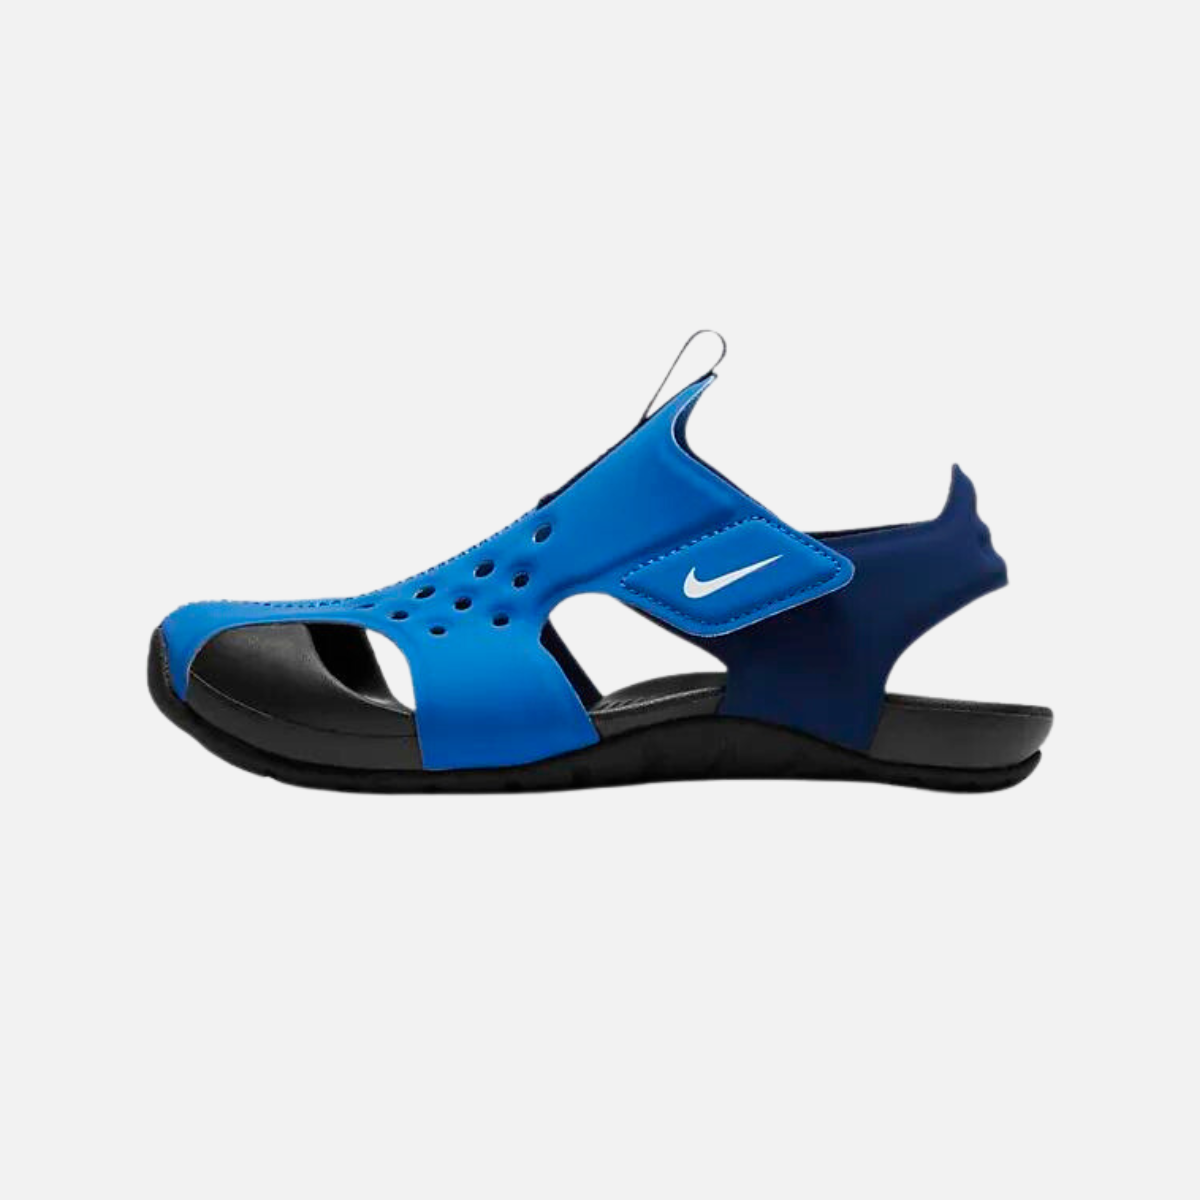 Nike Sunray Protect 2 Younger Kids Sandals -Signal Blue/Blue Void/Black/White